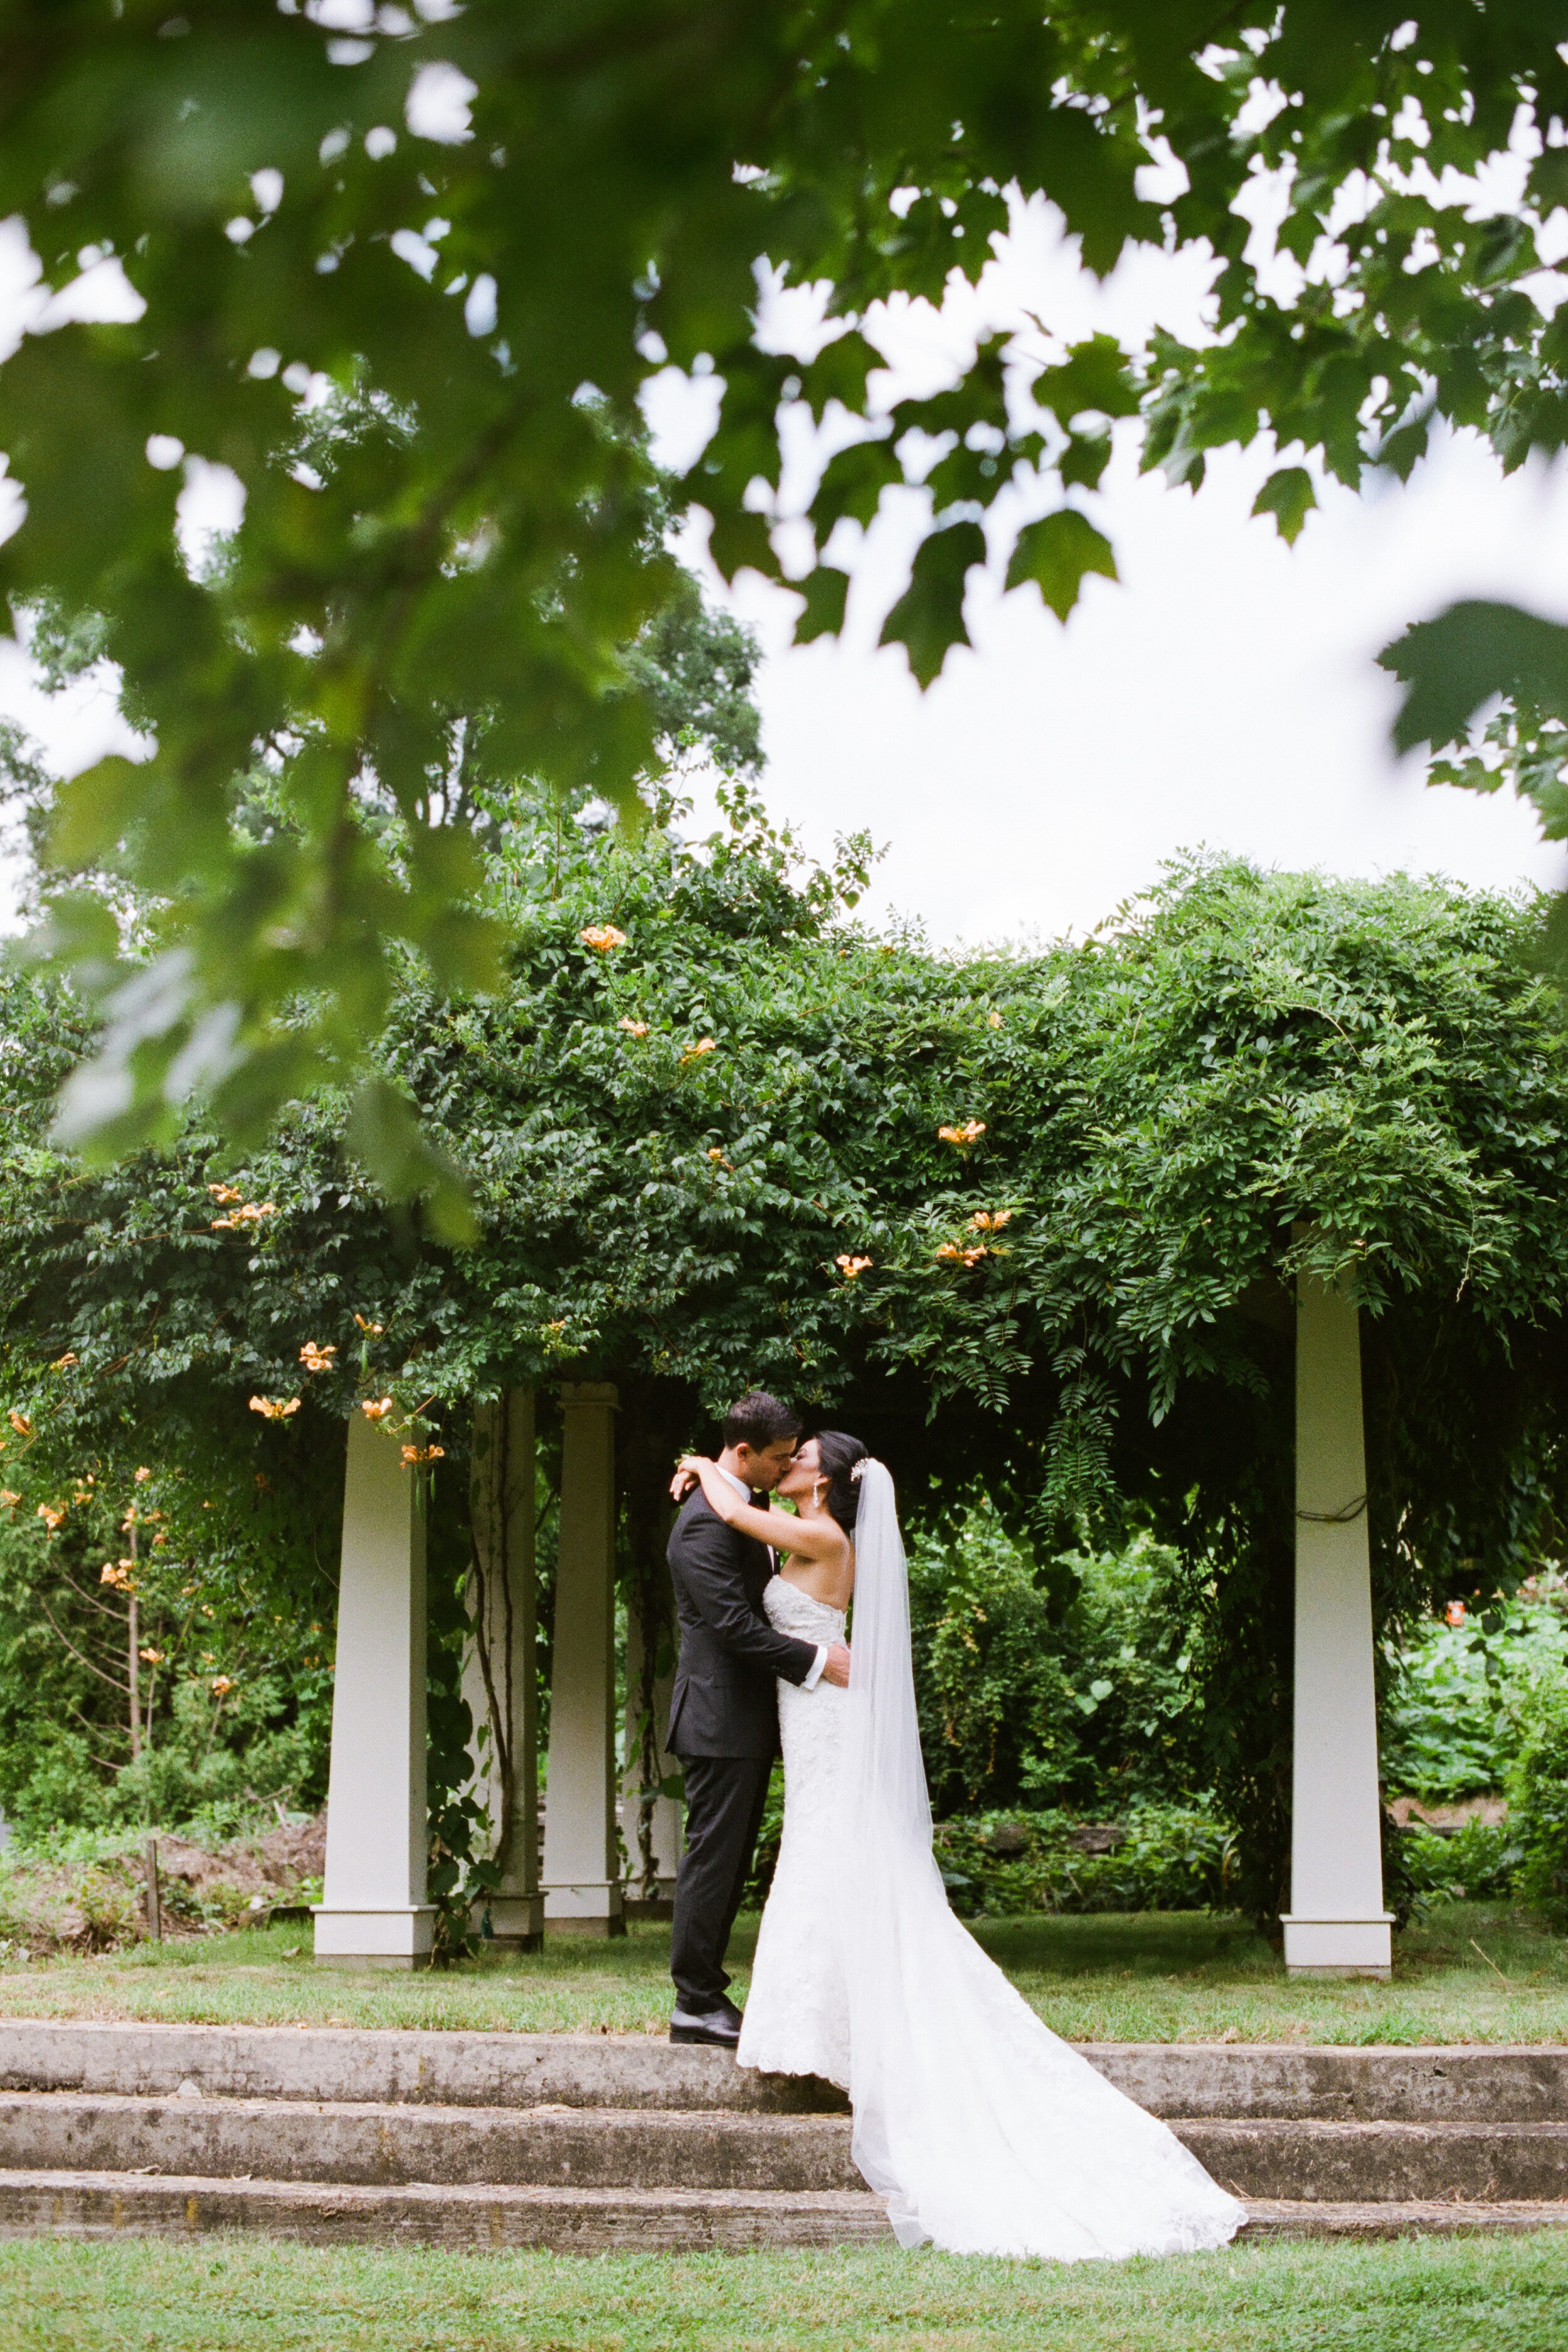 Wedding Photographers in the Berkshires MA